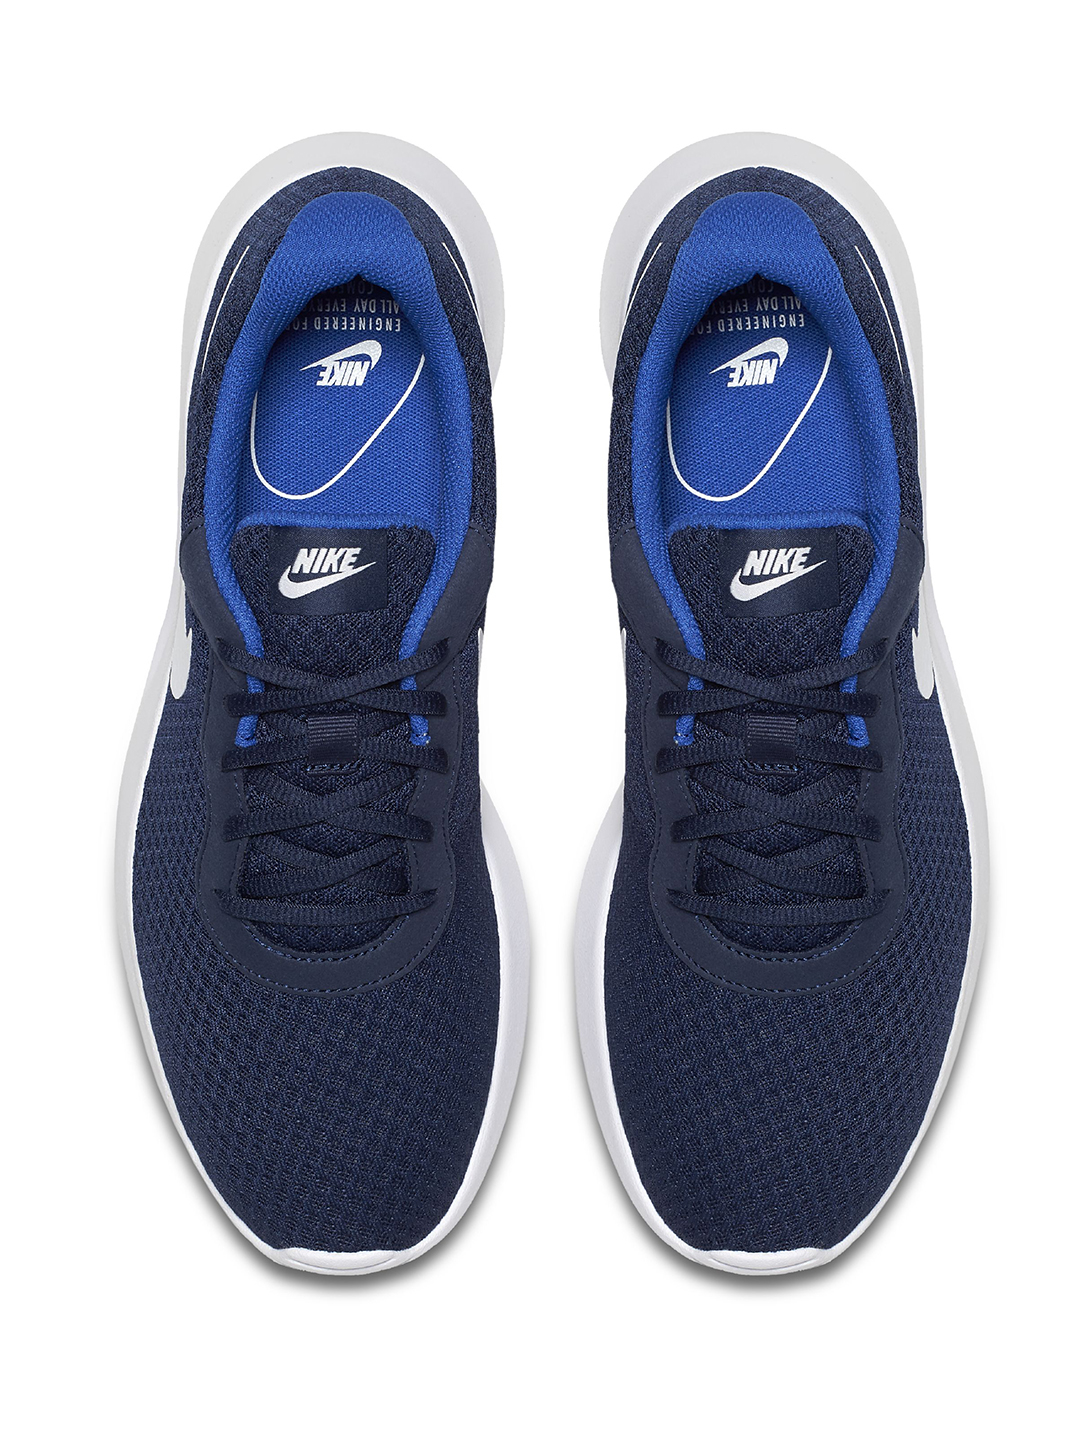 nike shoes myntra offer